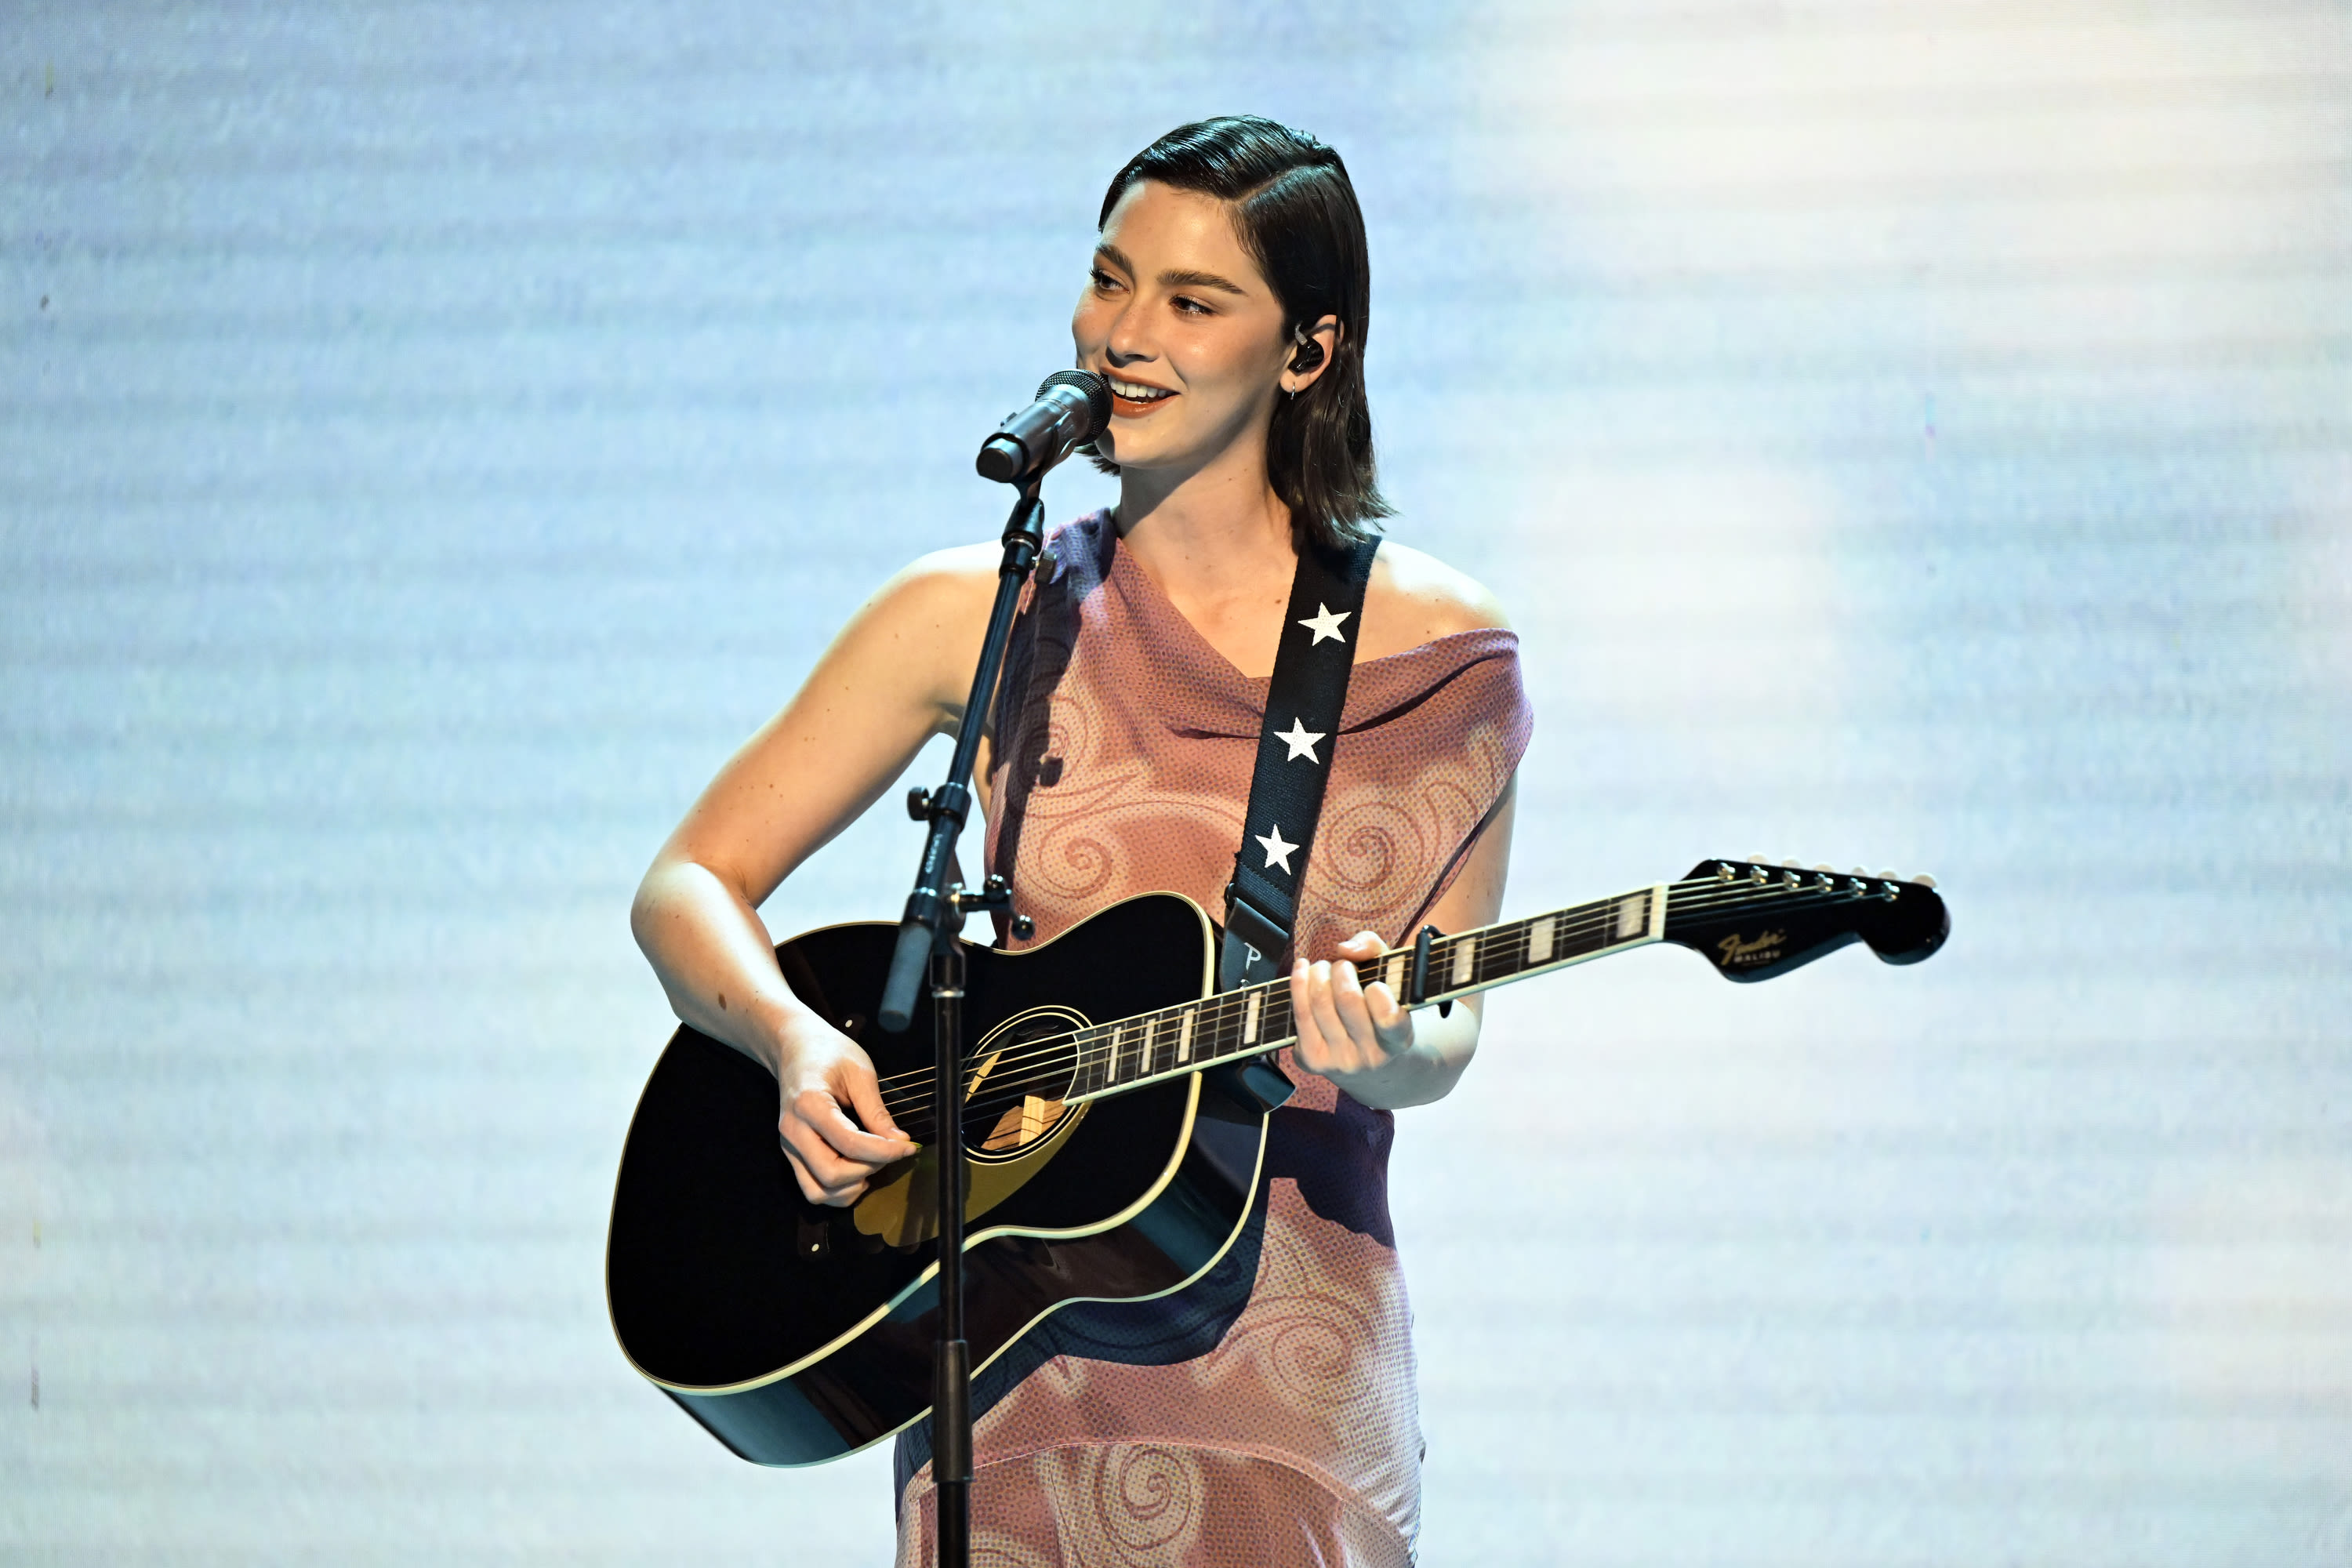 Watch Gracie Abrams Perform Courageous Single ‘Risk’ on ‘Fallon’